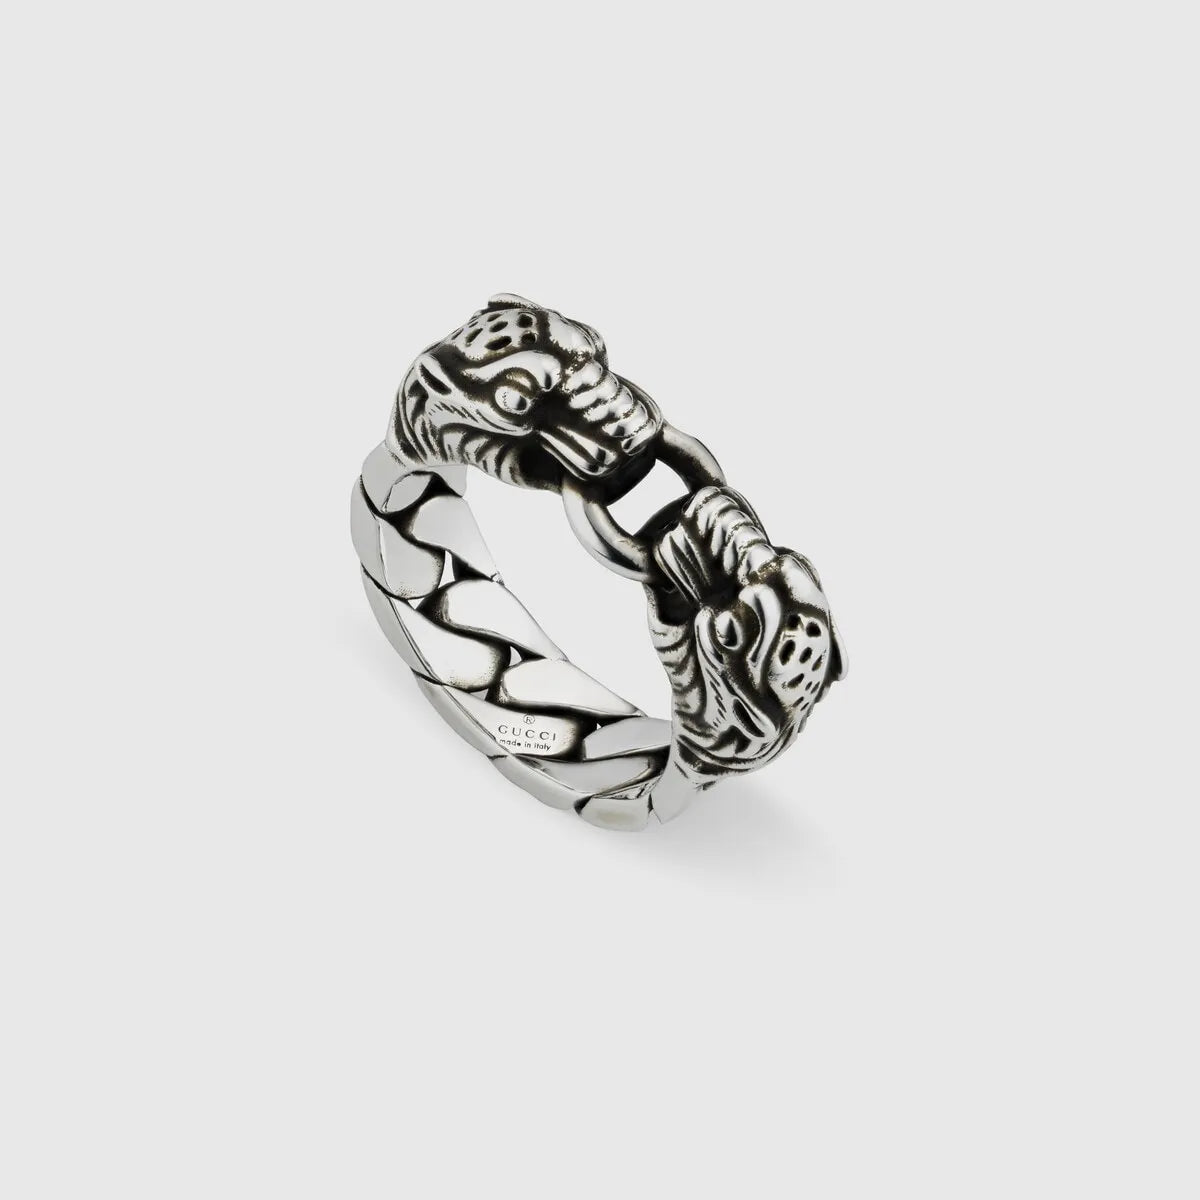 What's up RepFam, got a few pieces from Survival Source! Just wanted to  post for reference. Quick question - for the gucci tiger ring, do you guys  think the sizing at a